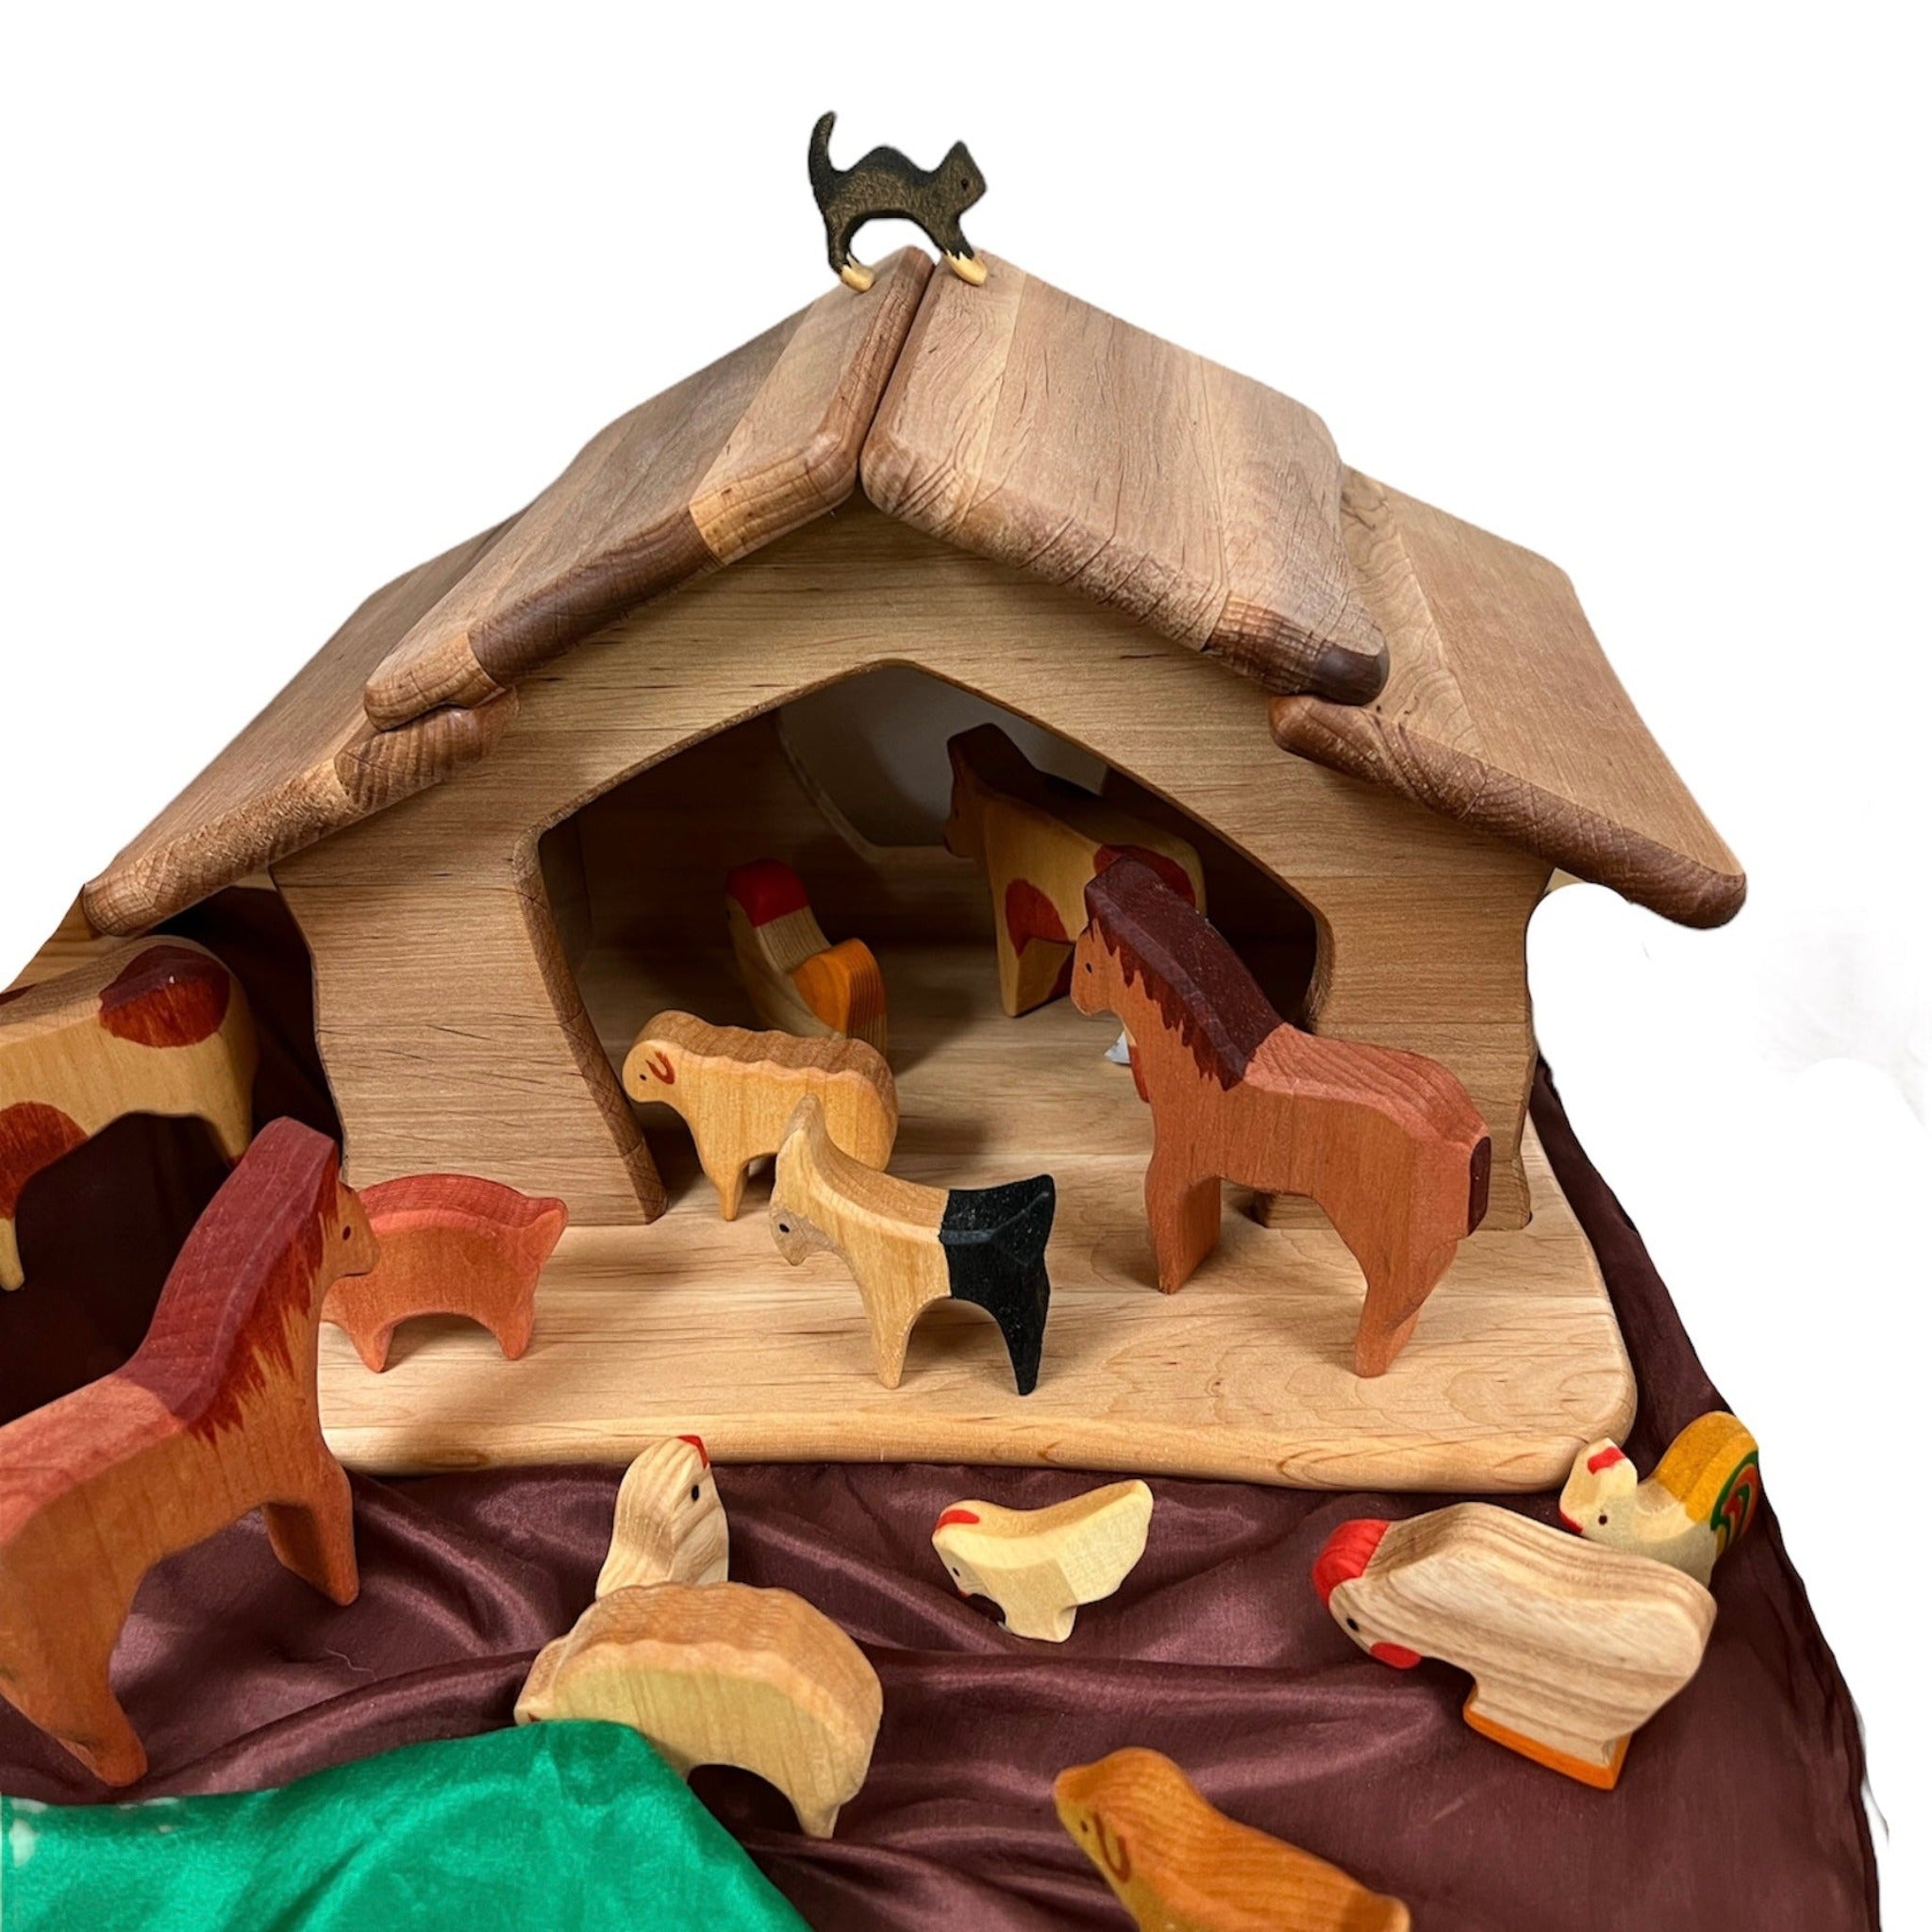 Drewart Small Stable or Nativity Stable